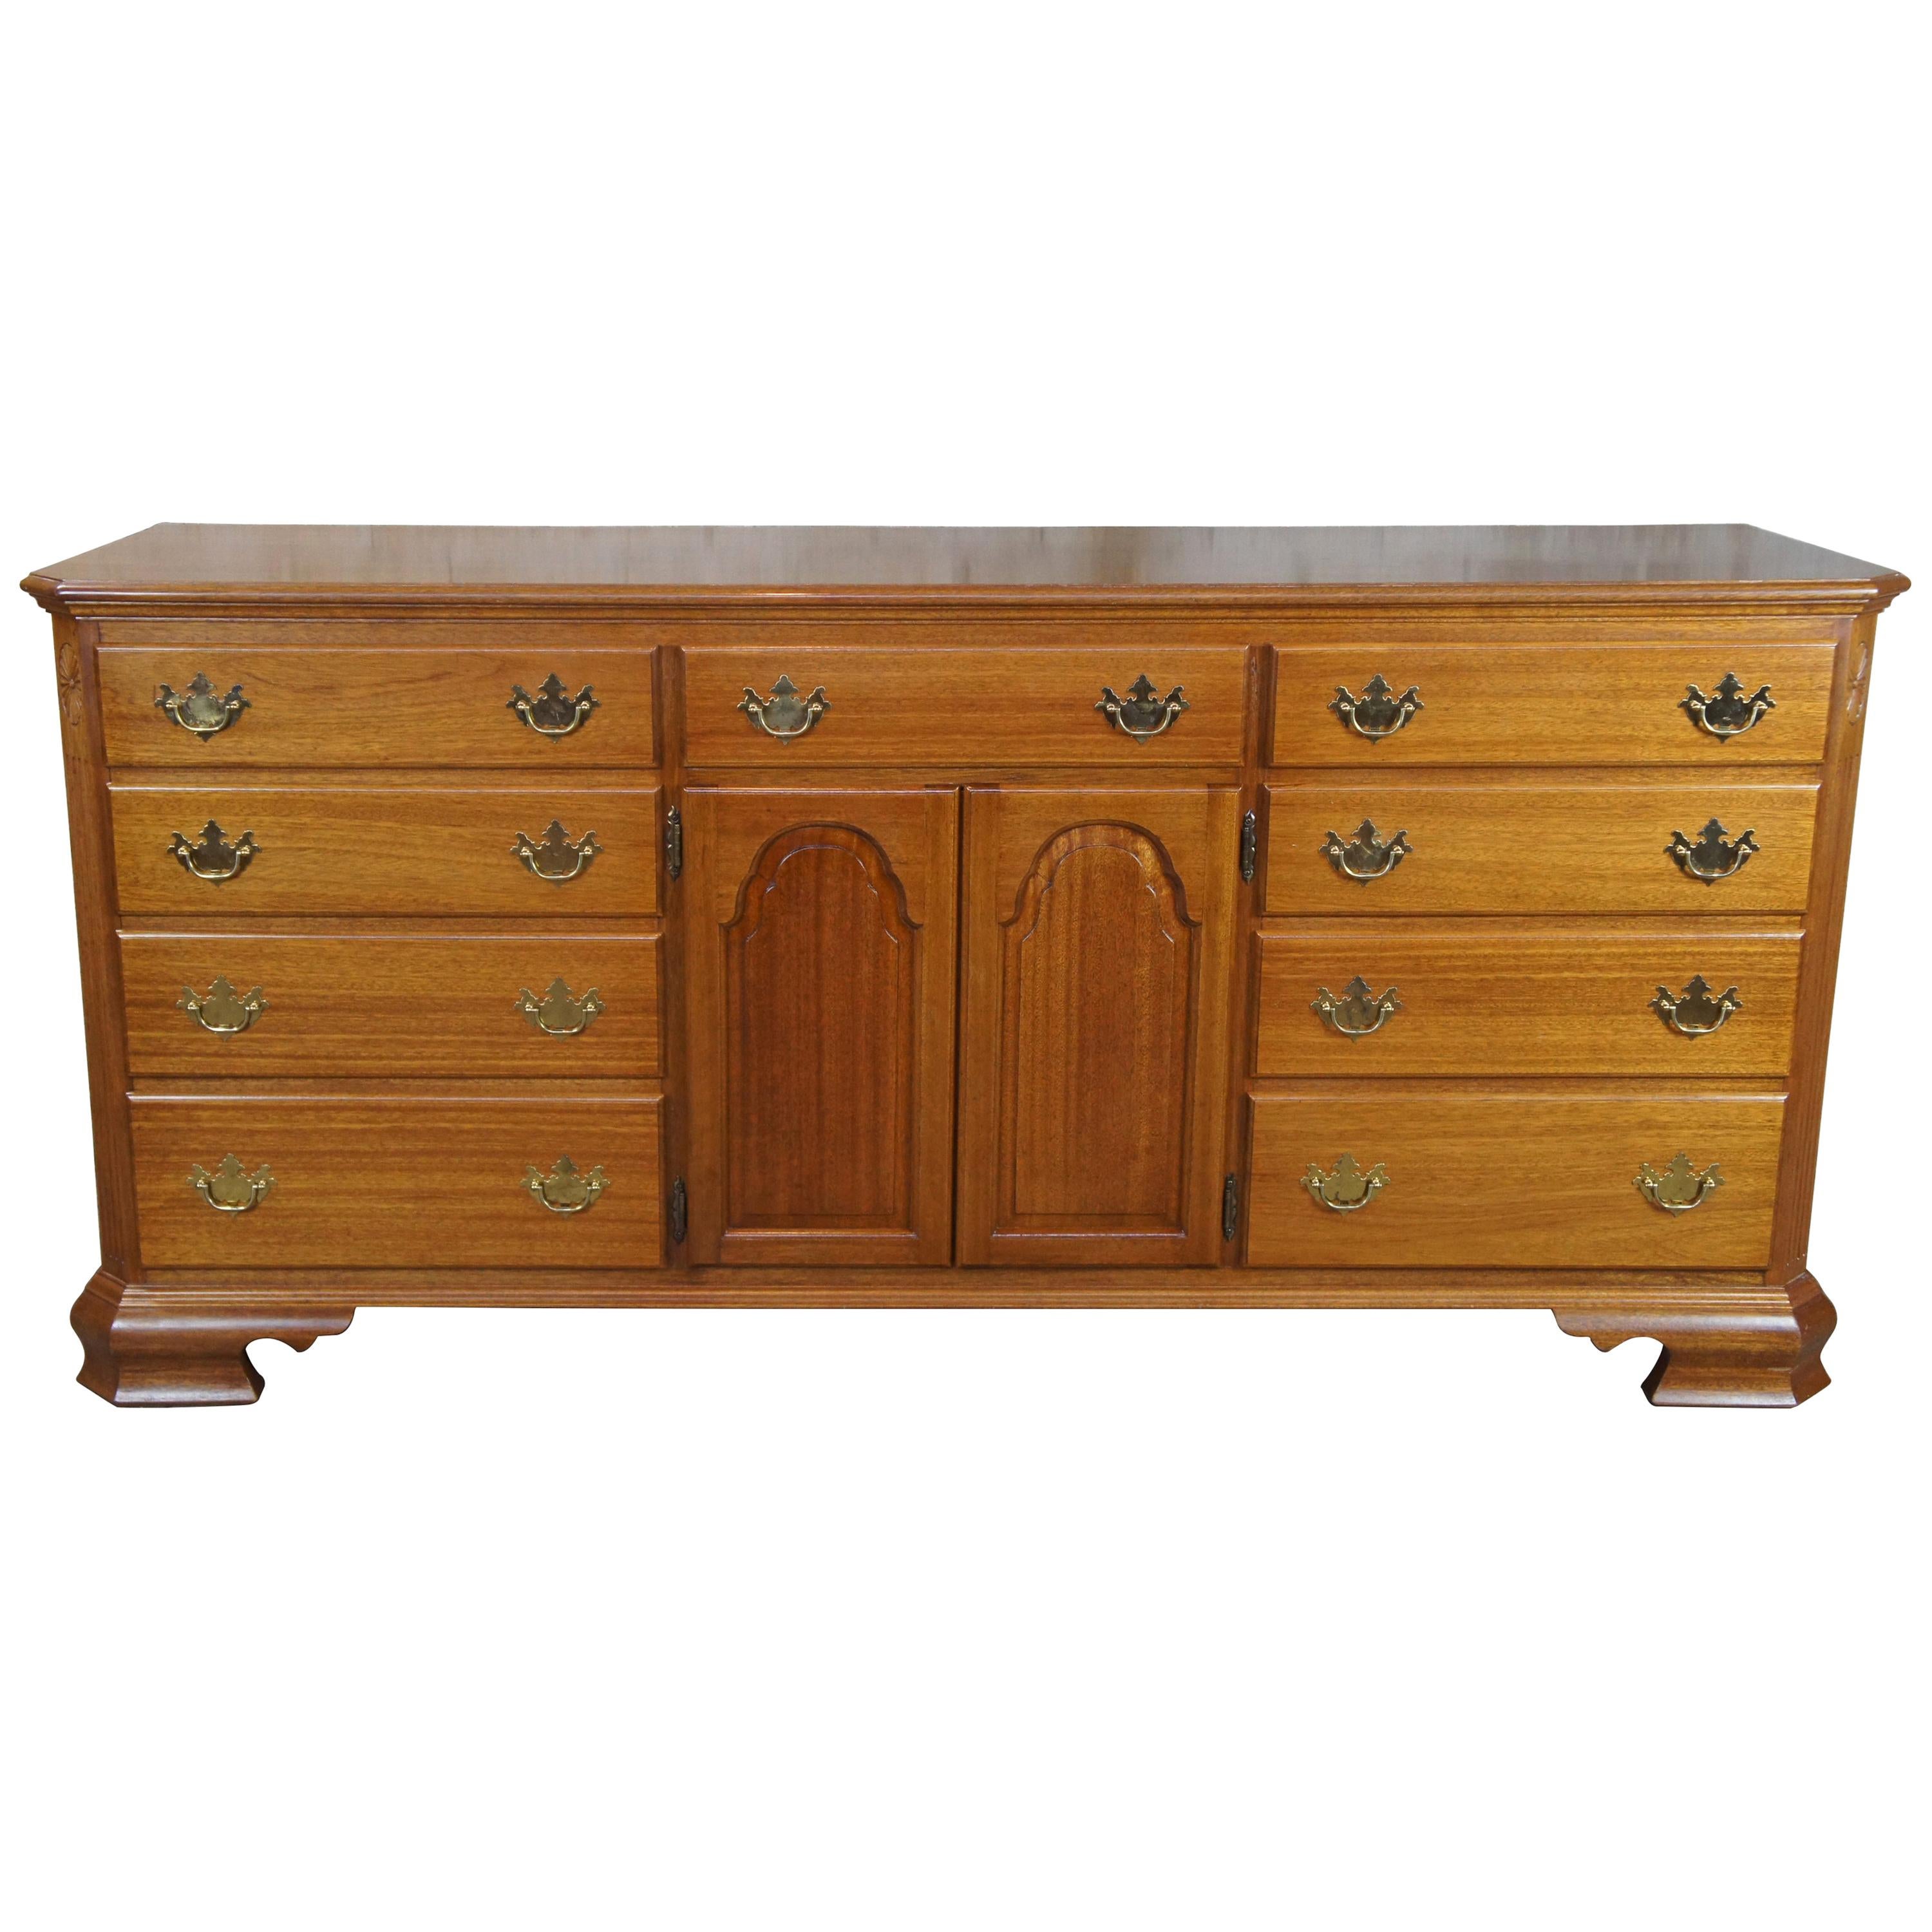 Early American Style Solid Mahogany 11-Drawer Triple Dresser Colonial